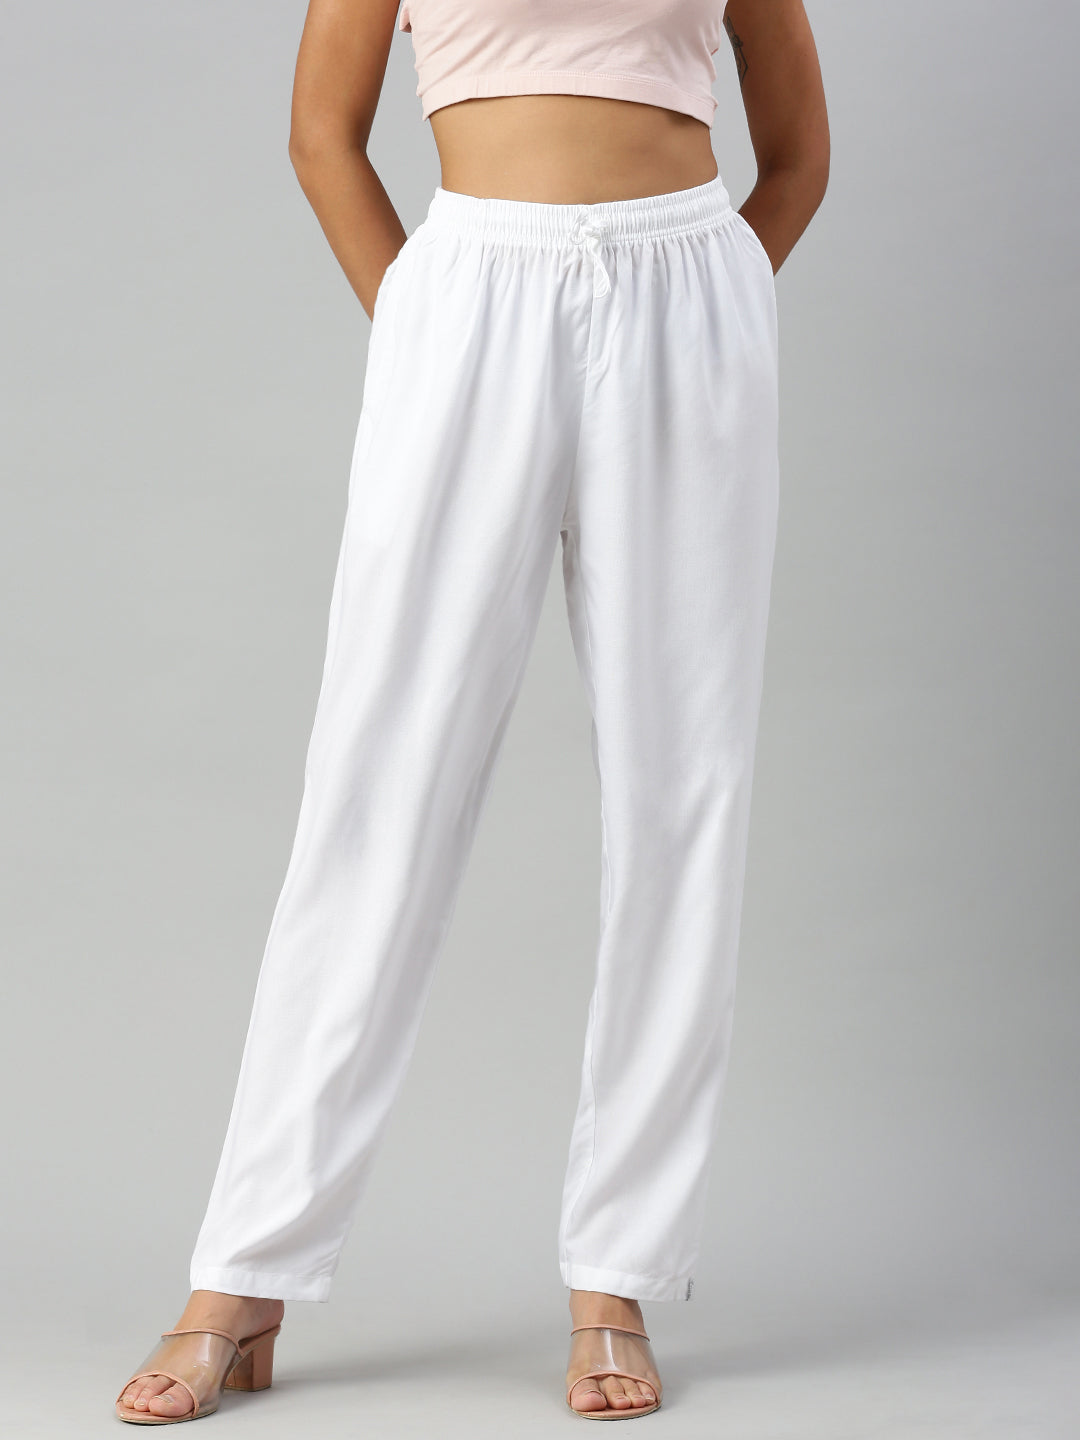 Amazon's Best-Selling Lounge Pants Are on Sale for $27 Right Now